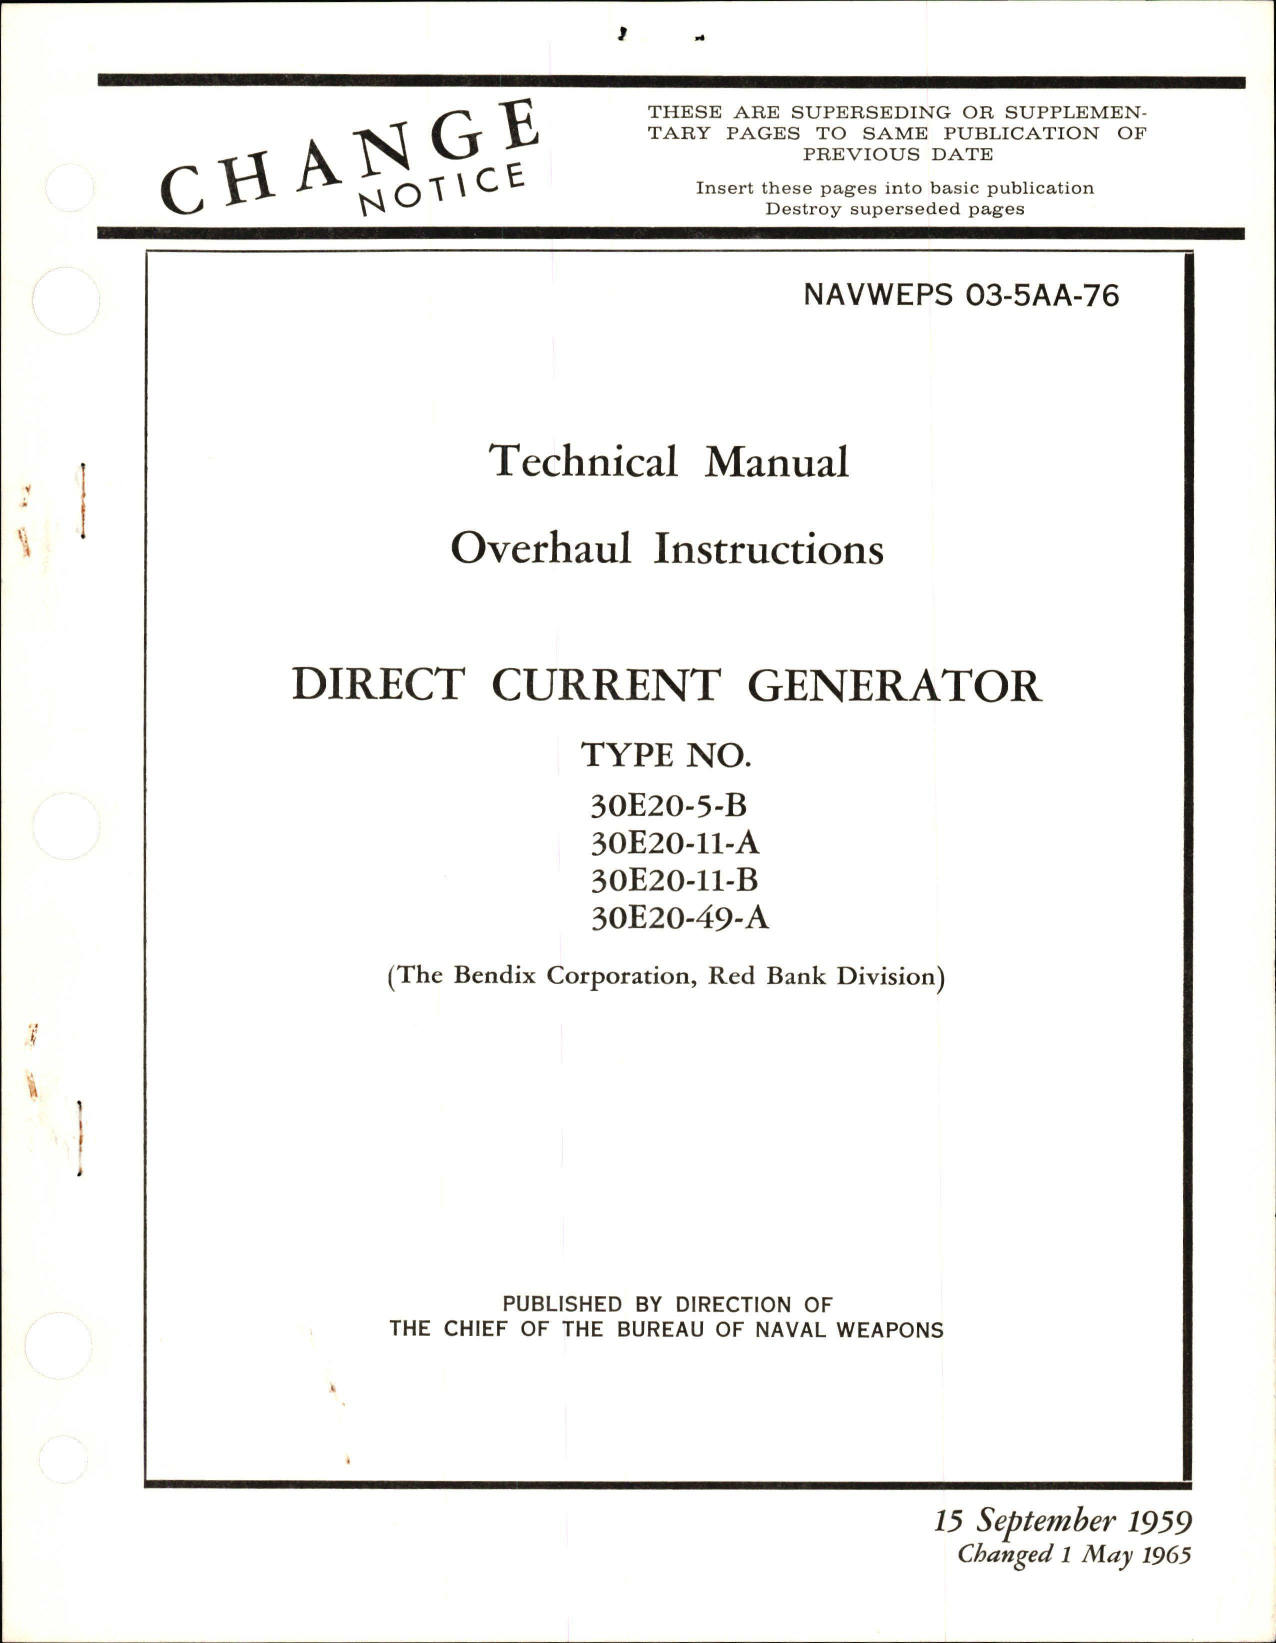 Sample page 1 from AirCorps Library document: Overhaul Instructions for Direct Current Generator - Type 30E20-5-B, 30E20-11-A, 30E20-11-B, and 30E20-49-A